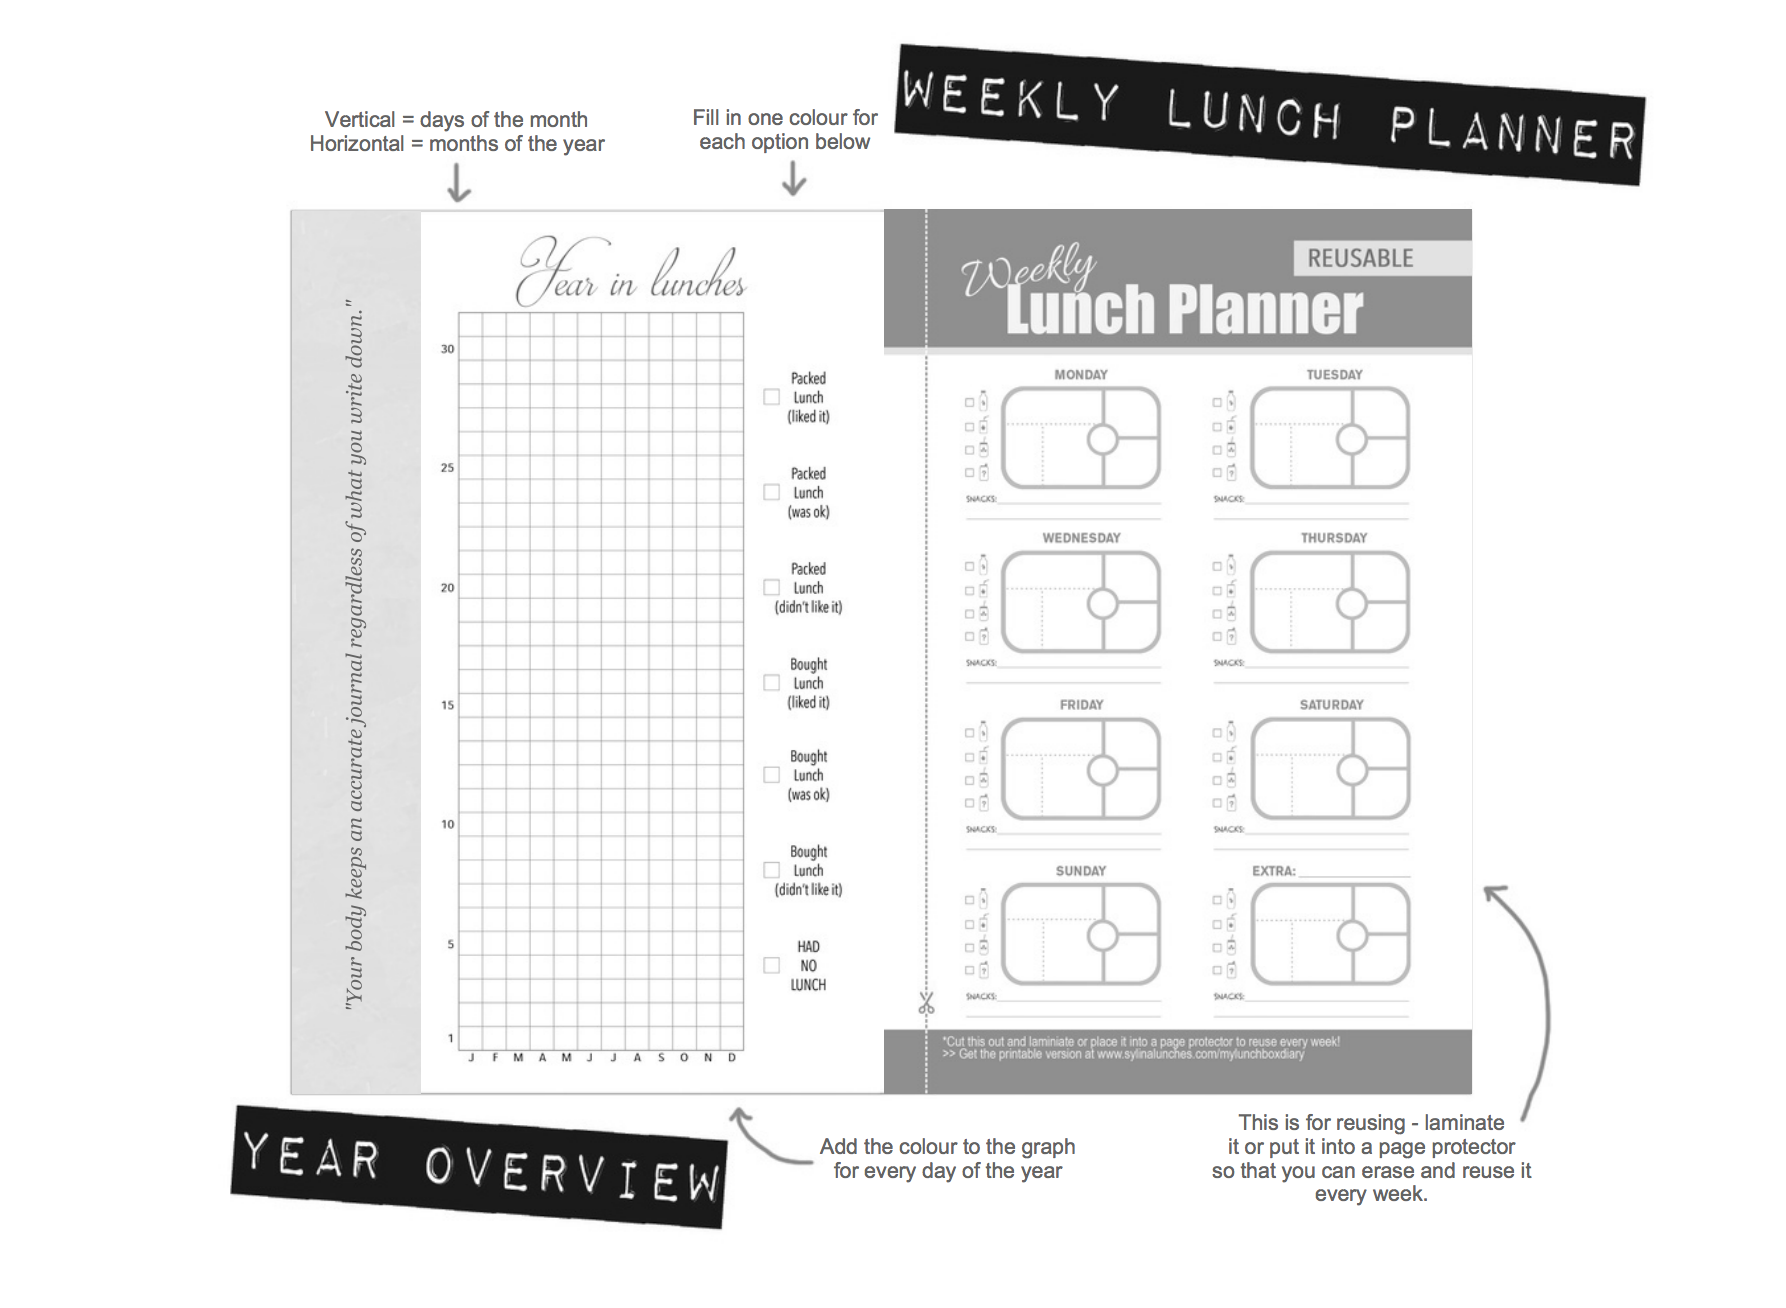 http://www.sylinalunches.com/wp-content/uploads/2018/02/weeklymealplanner.png